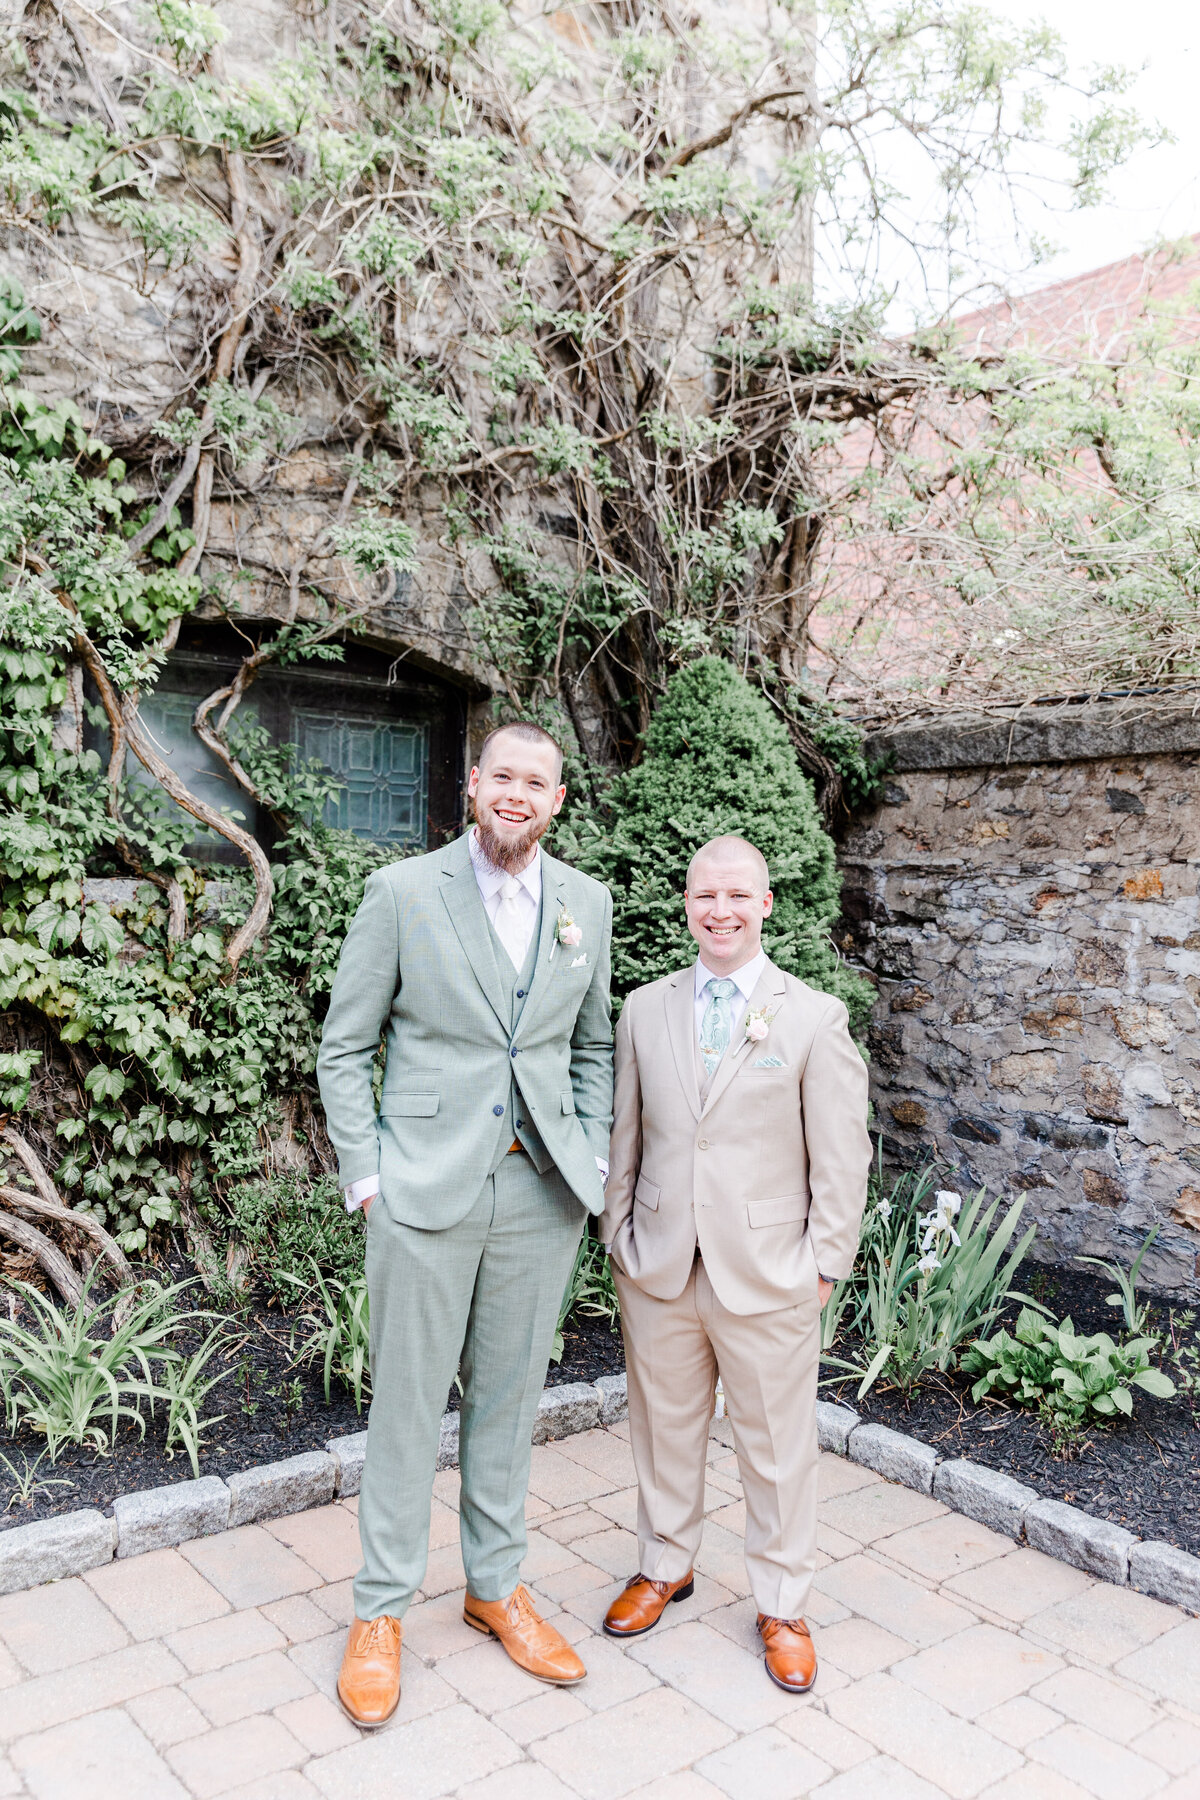 wedding-photography-at-saint-clements-castle-in-portland-connecticut-49